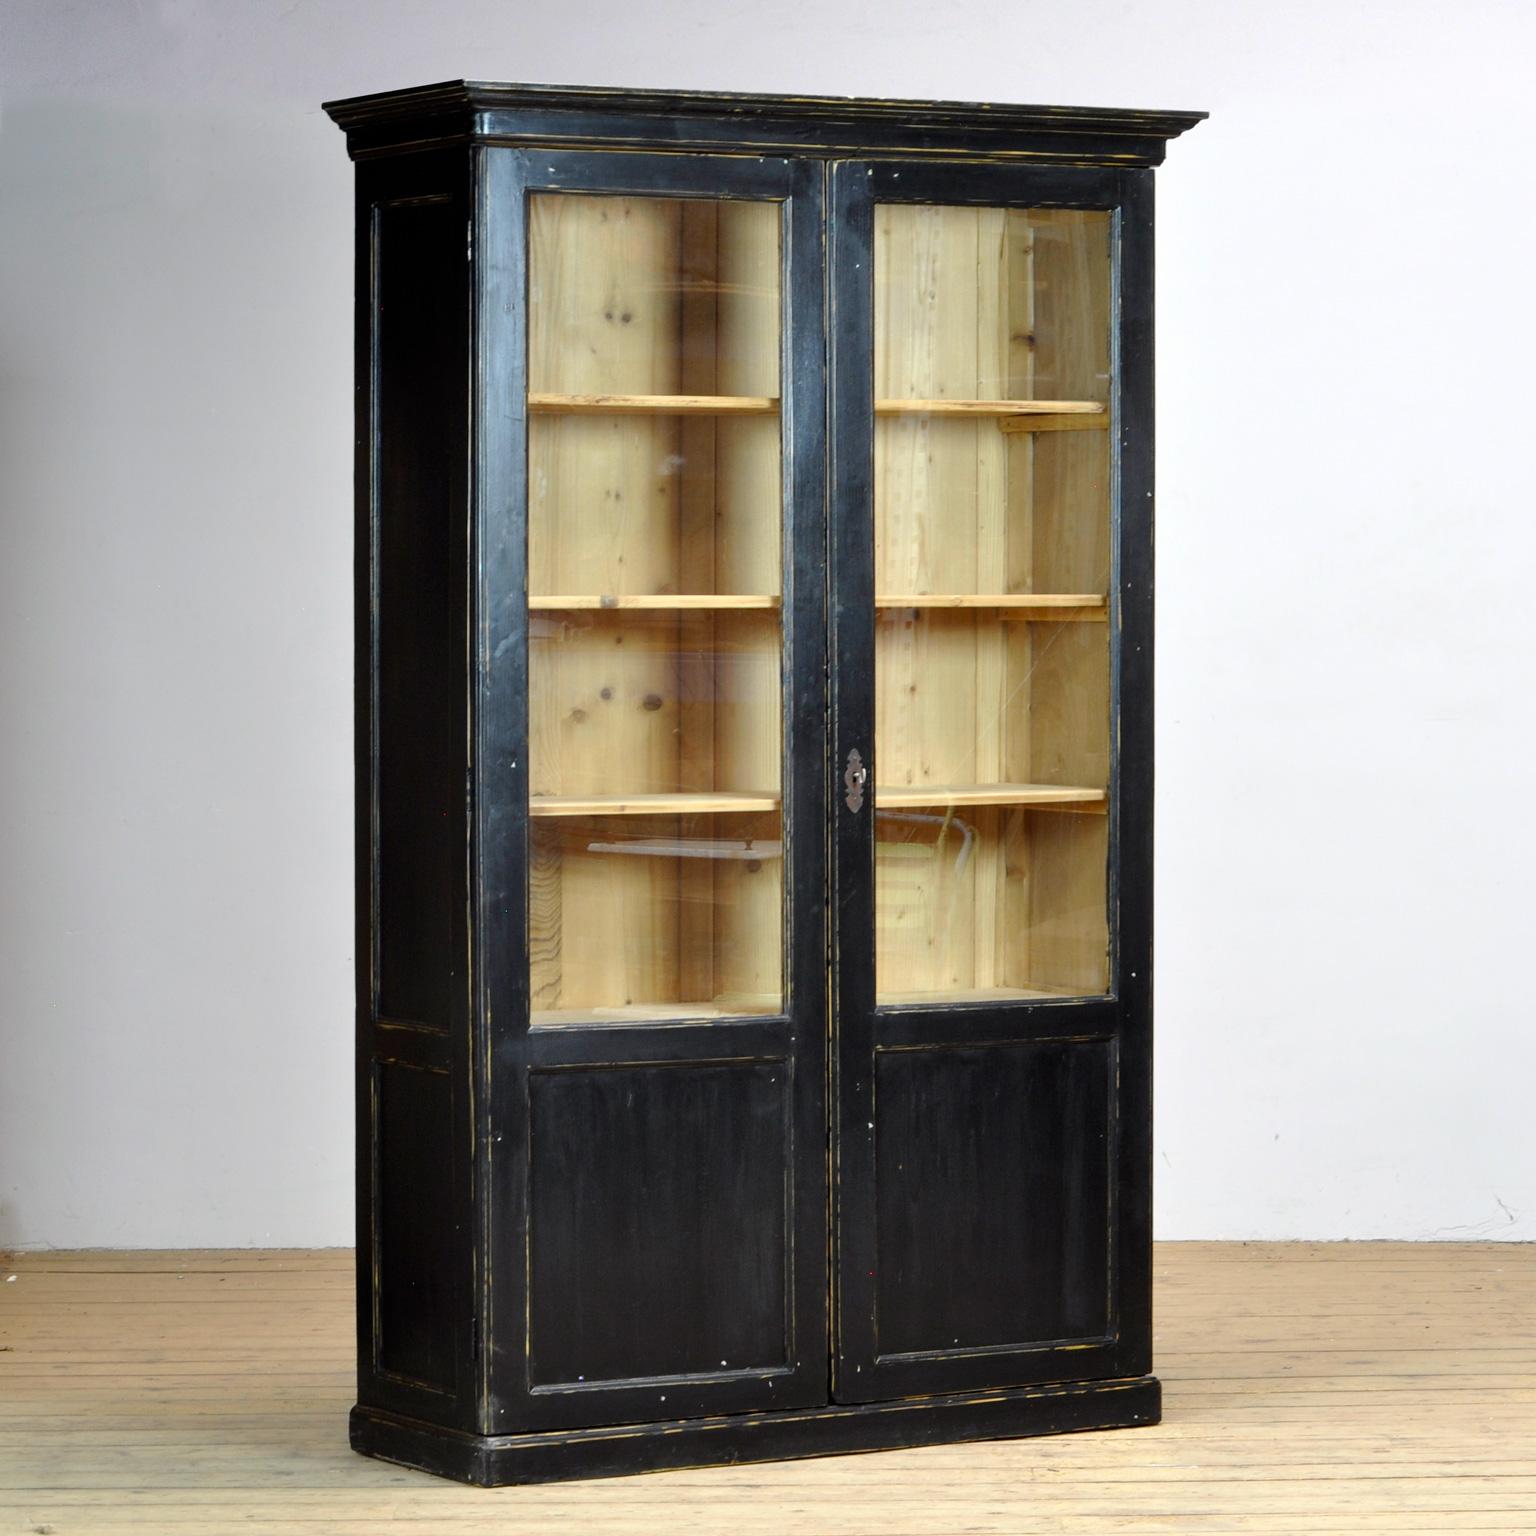 This pine display cabinet from the 1930's has been given new life with a professional black painted finish, lightly distressed to compliment the age and bring out the warmth of the pine.
At 223 cm tall, this will make a wonderful bookcase or display